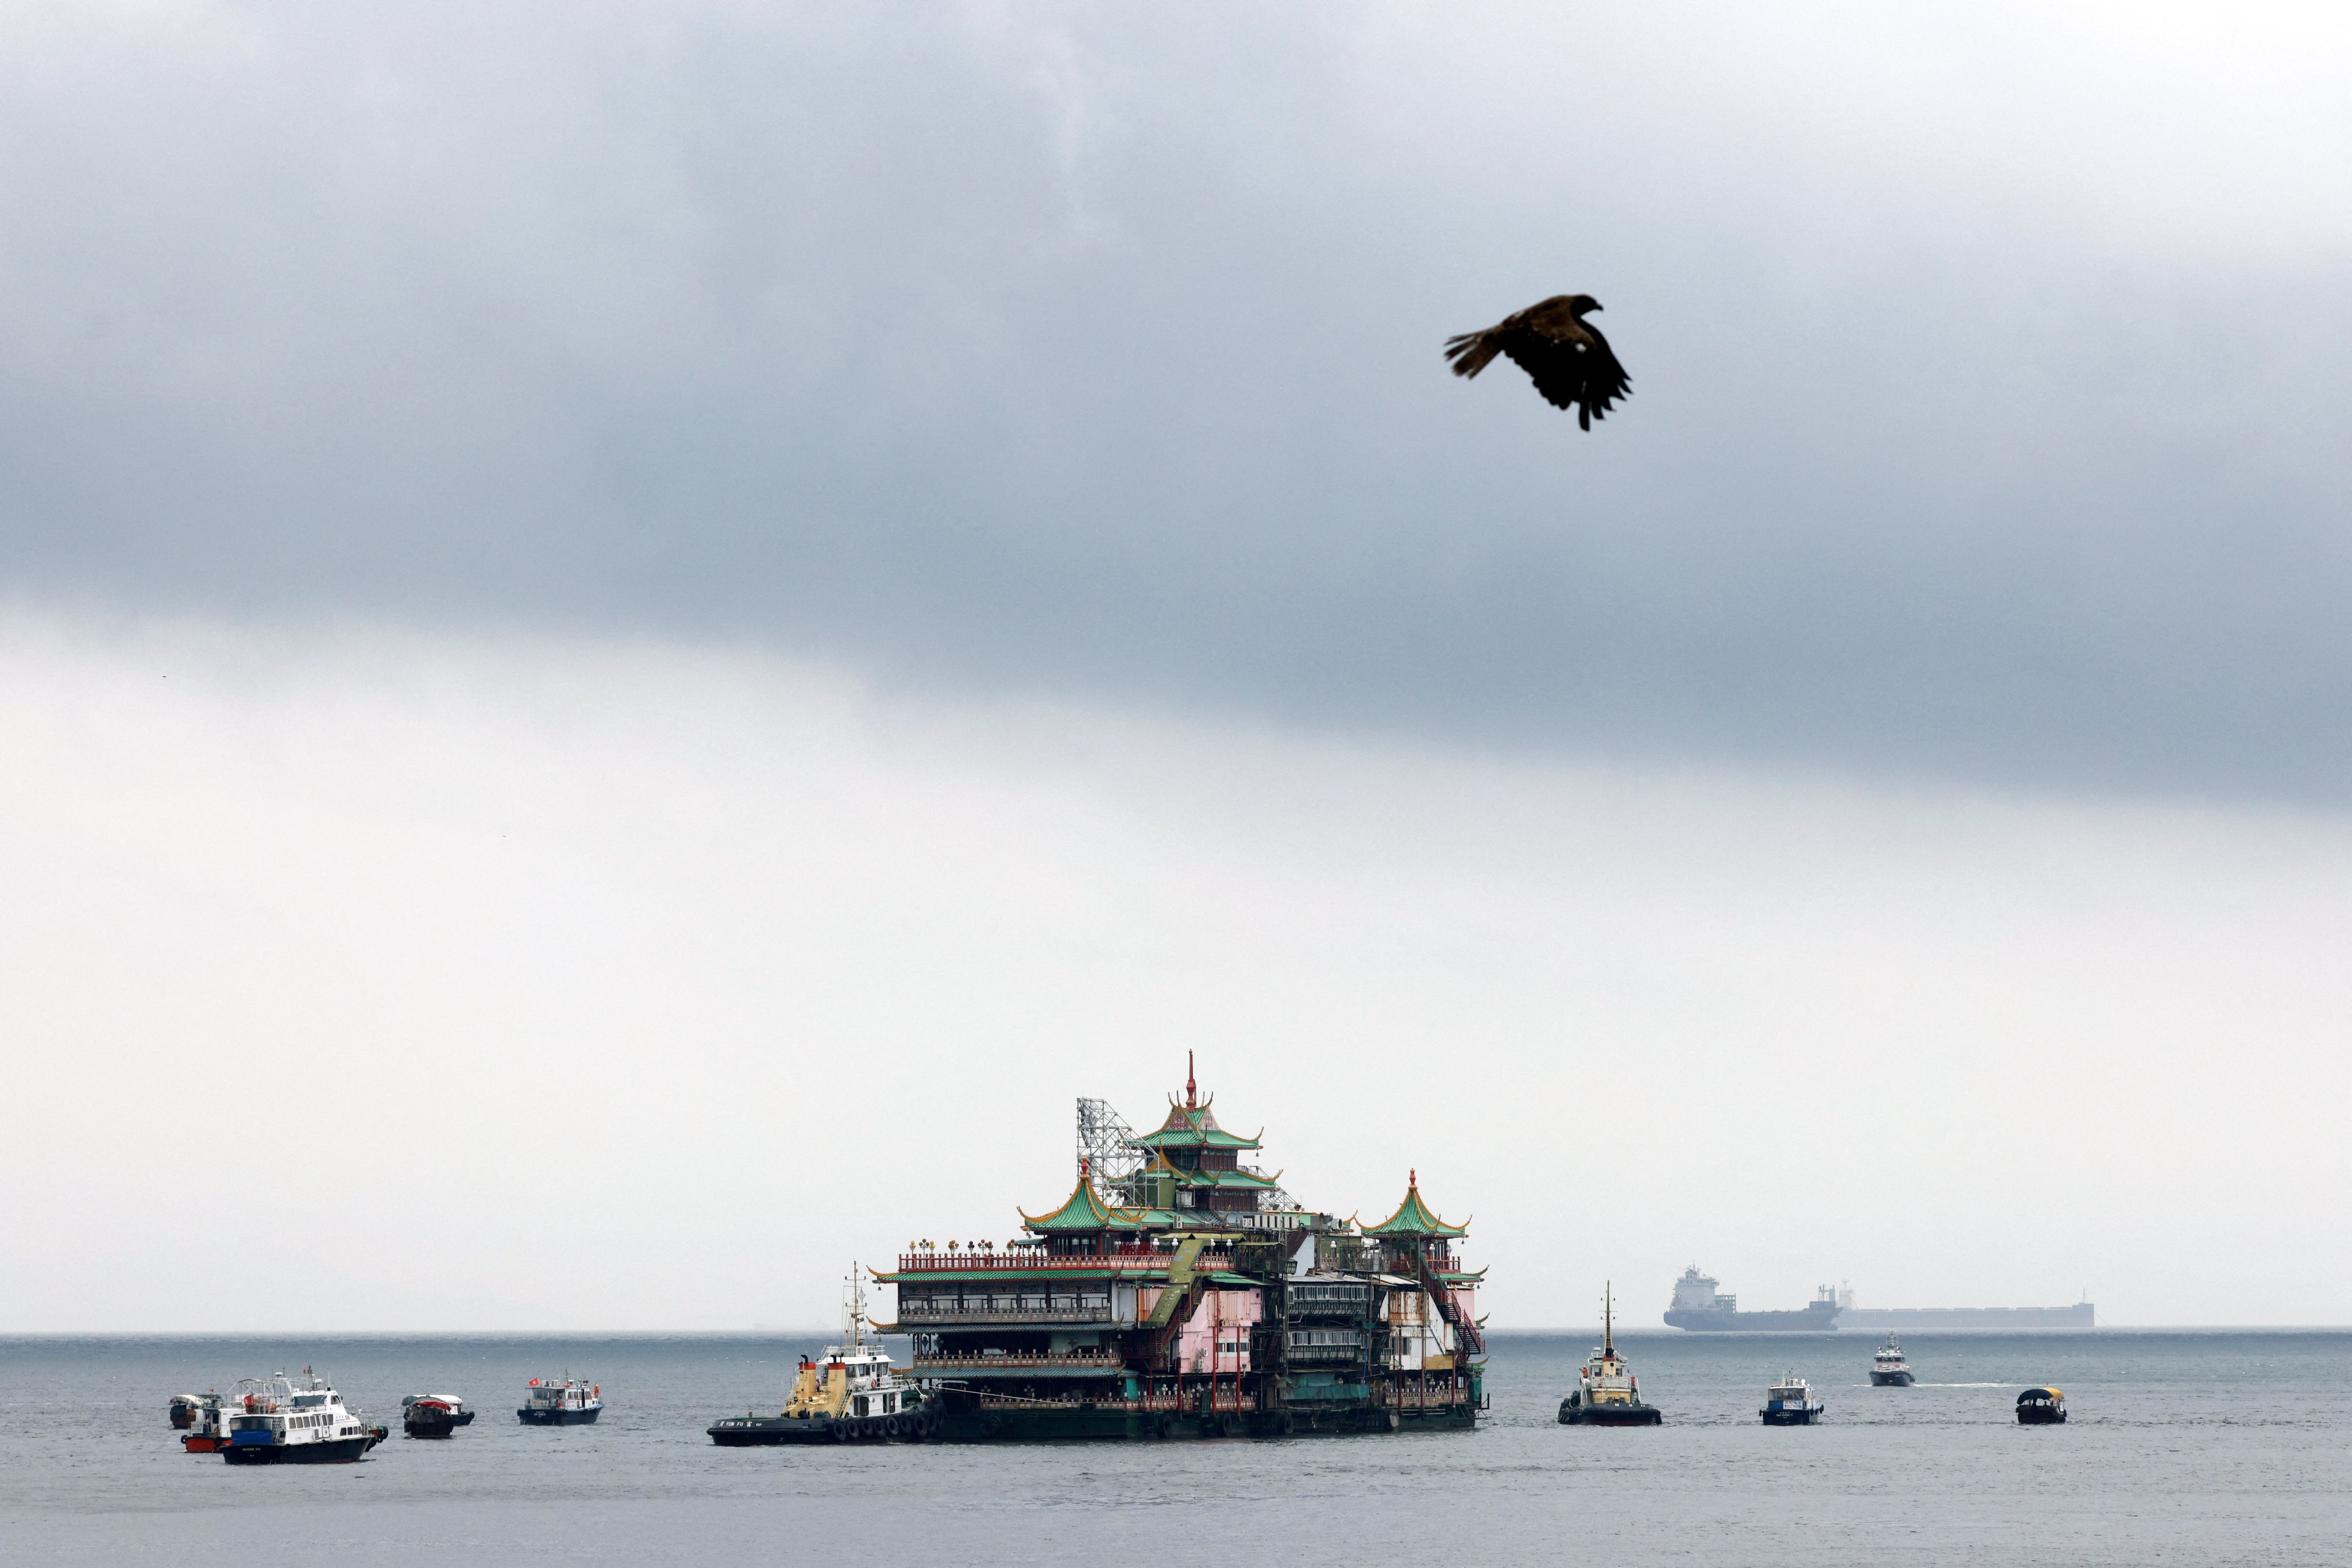 The floating restaurant heads off on its ill-fated journey. Photo: Reuters